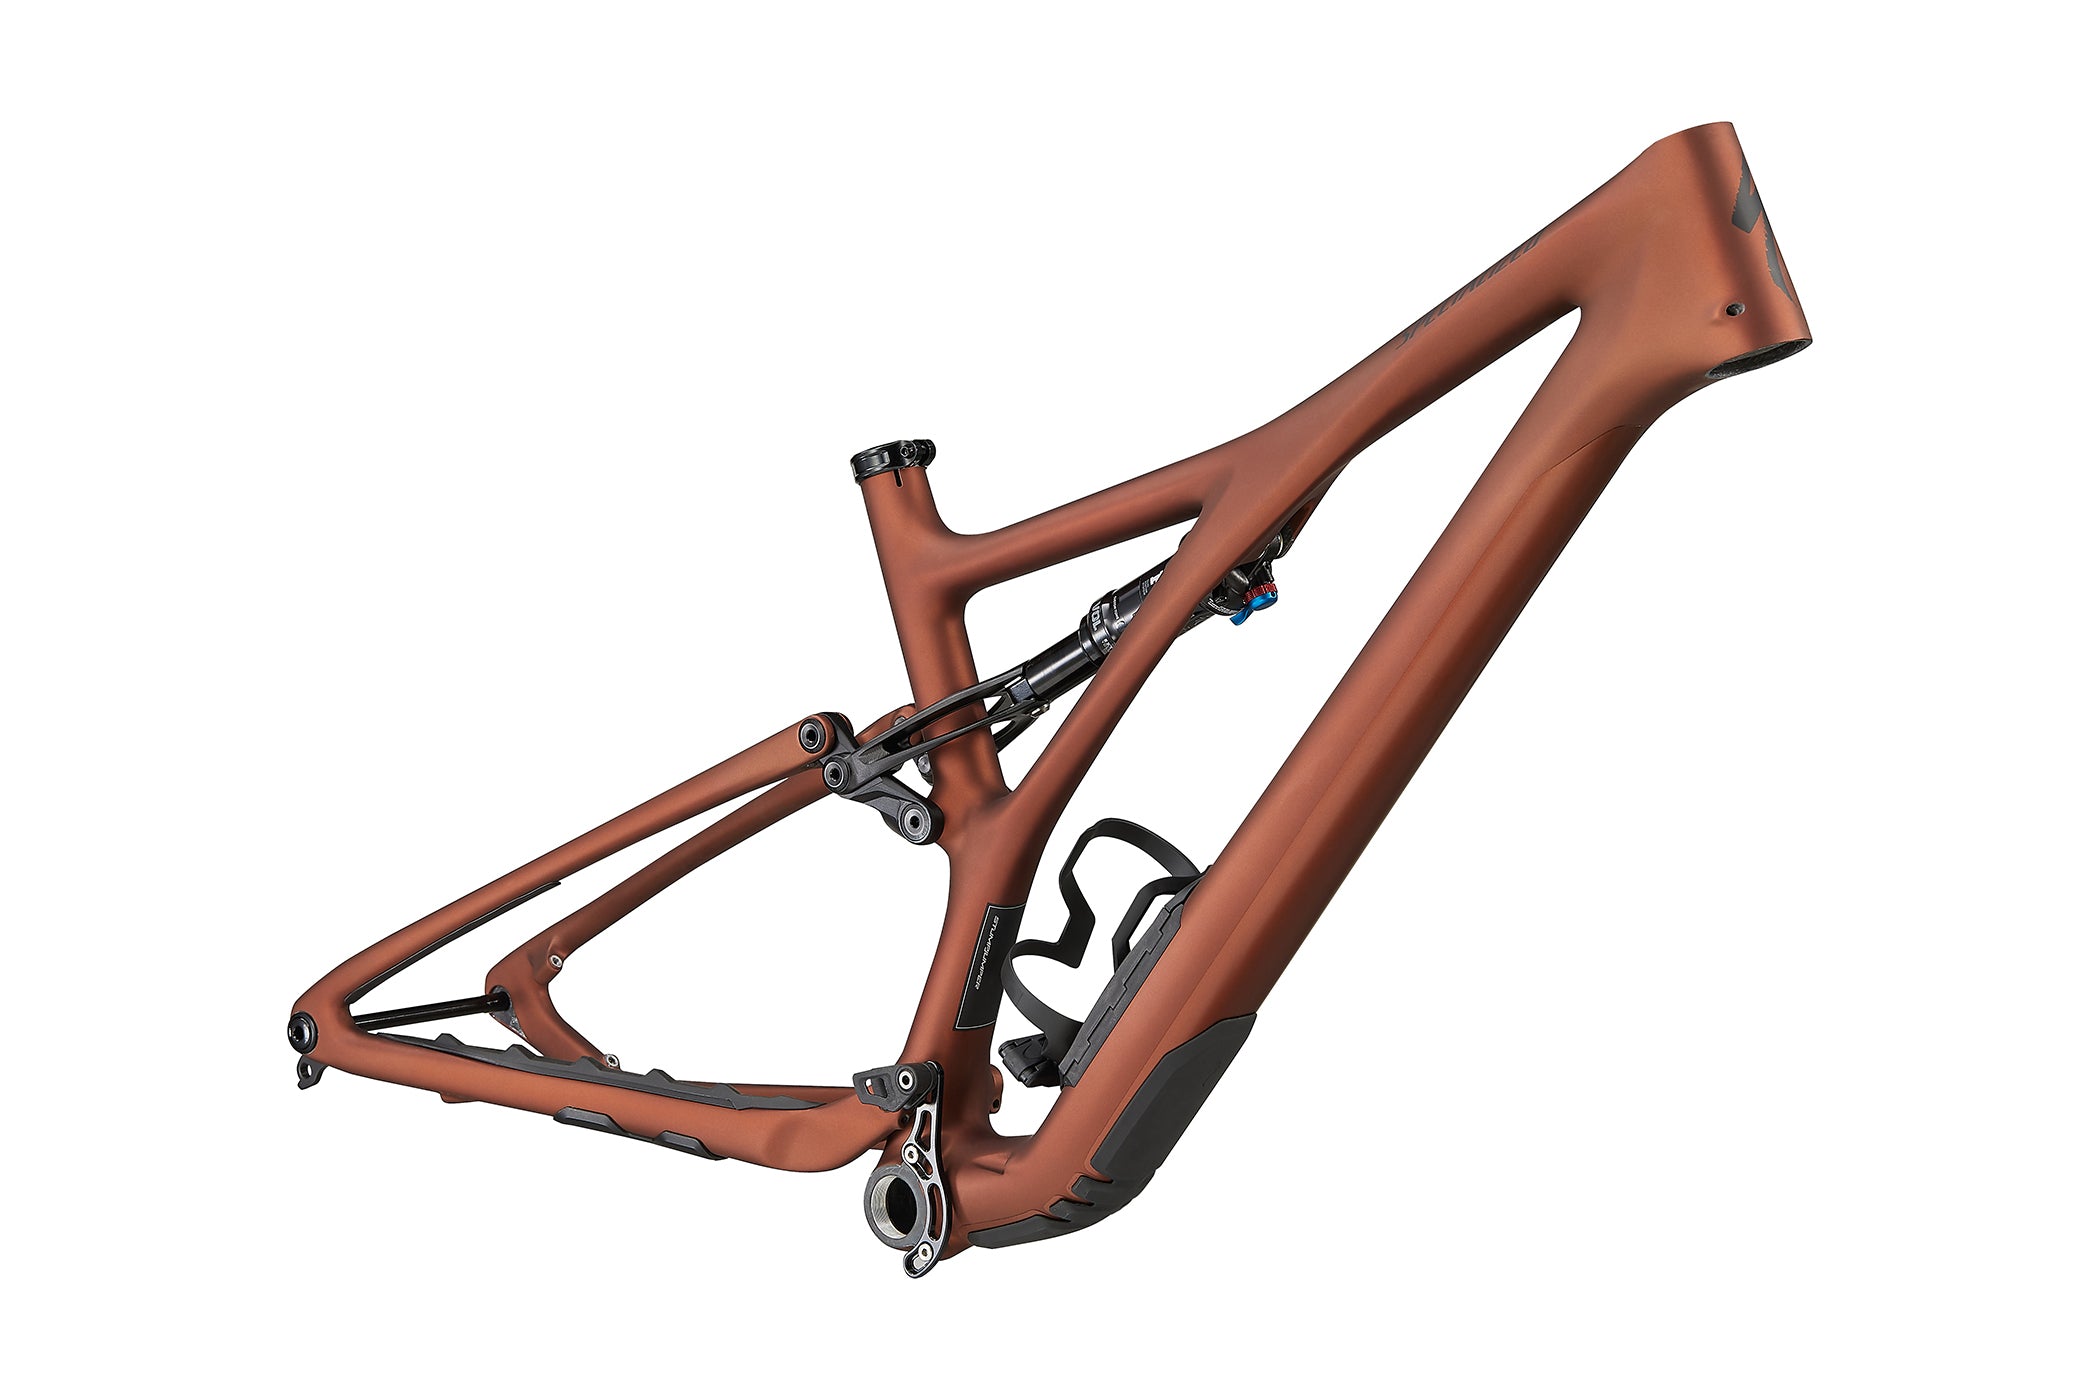 New and Used Mountain Bike (MTB) Frames For Sale Full Suspension and Hardtail The Pros Closet